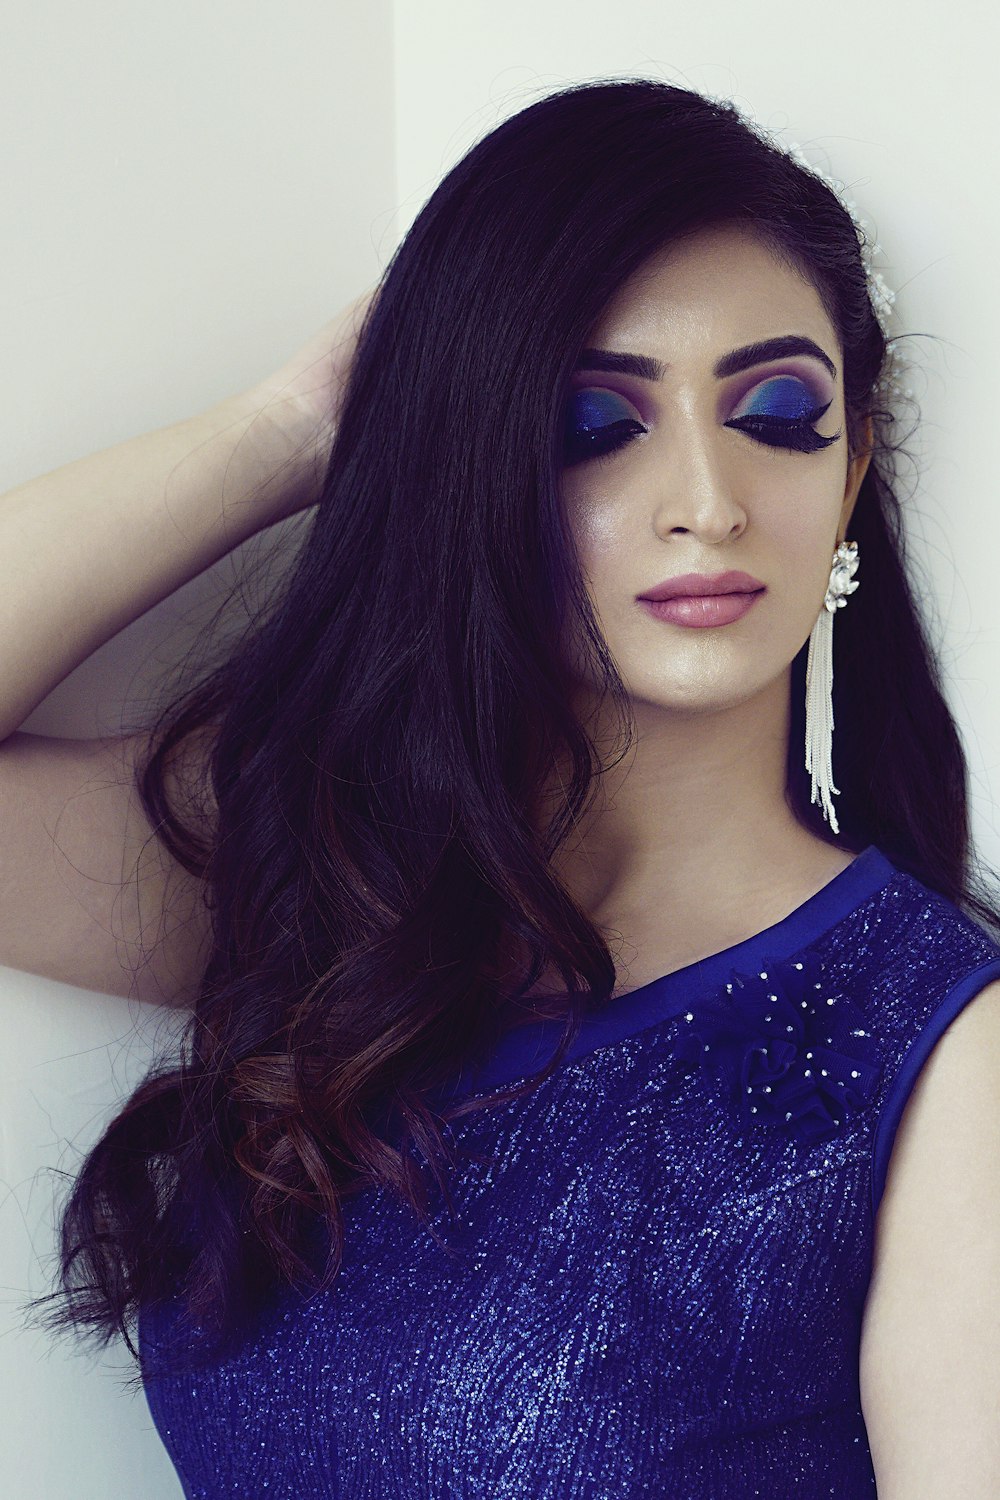 woman wearing blue sleeveless blouse with blue eyeshadow standing while touching her hair